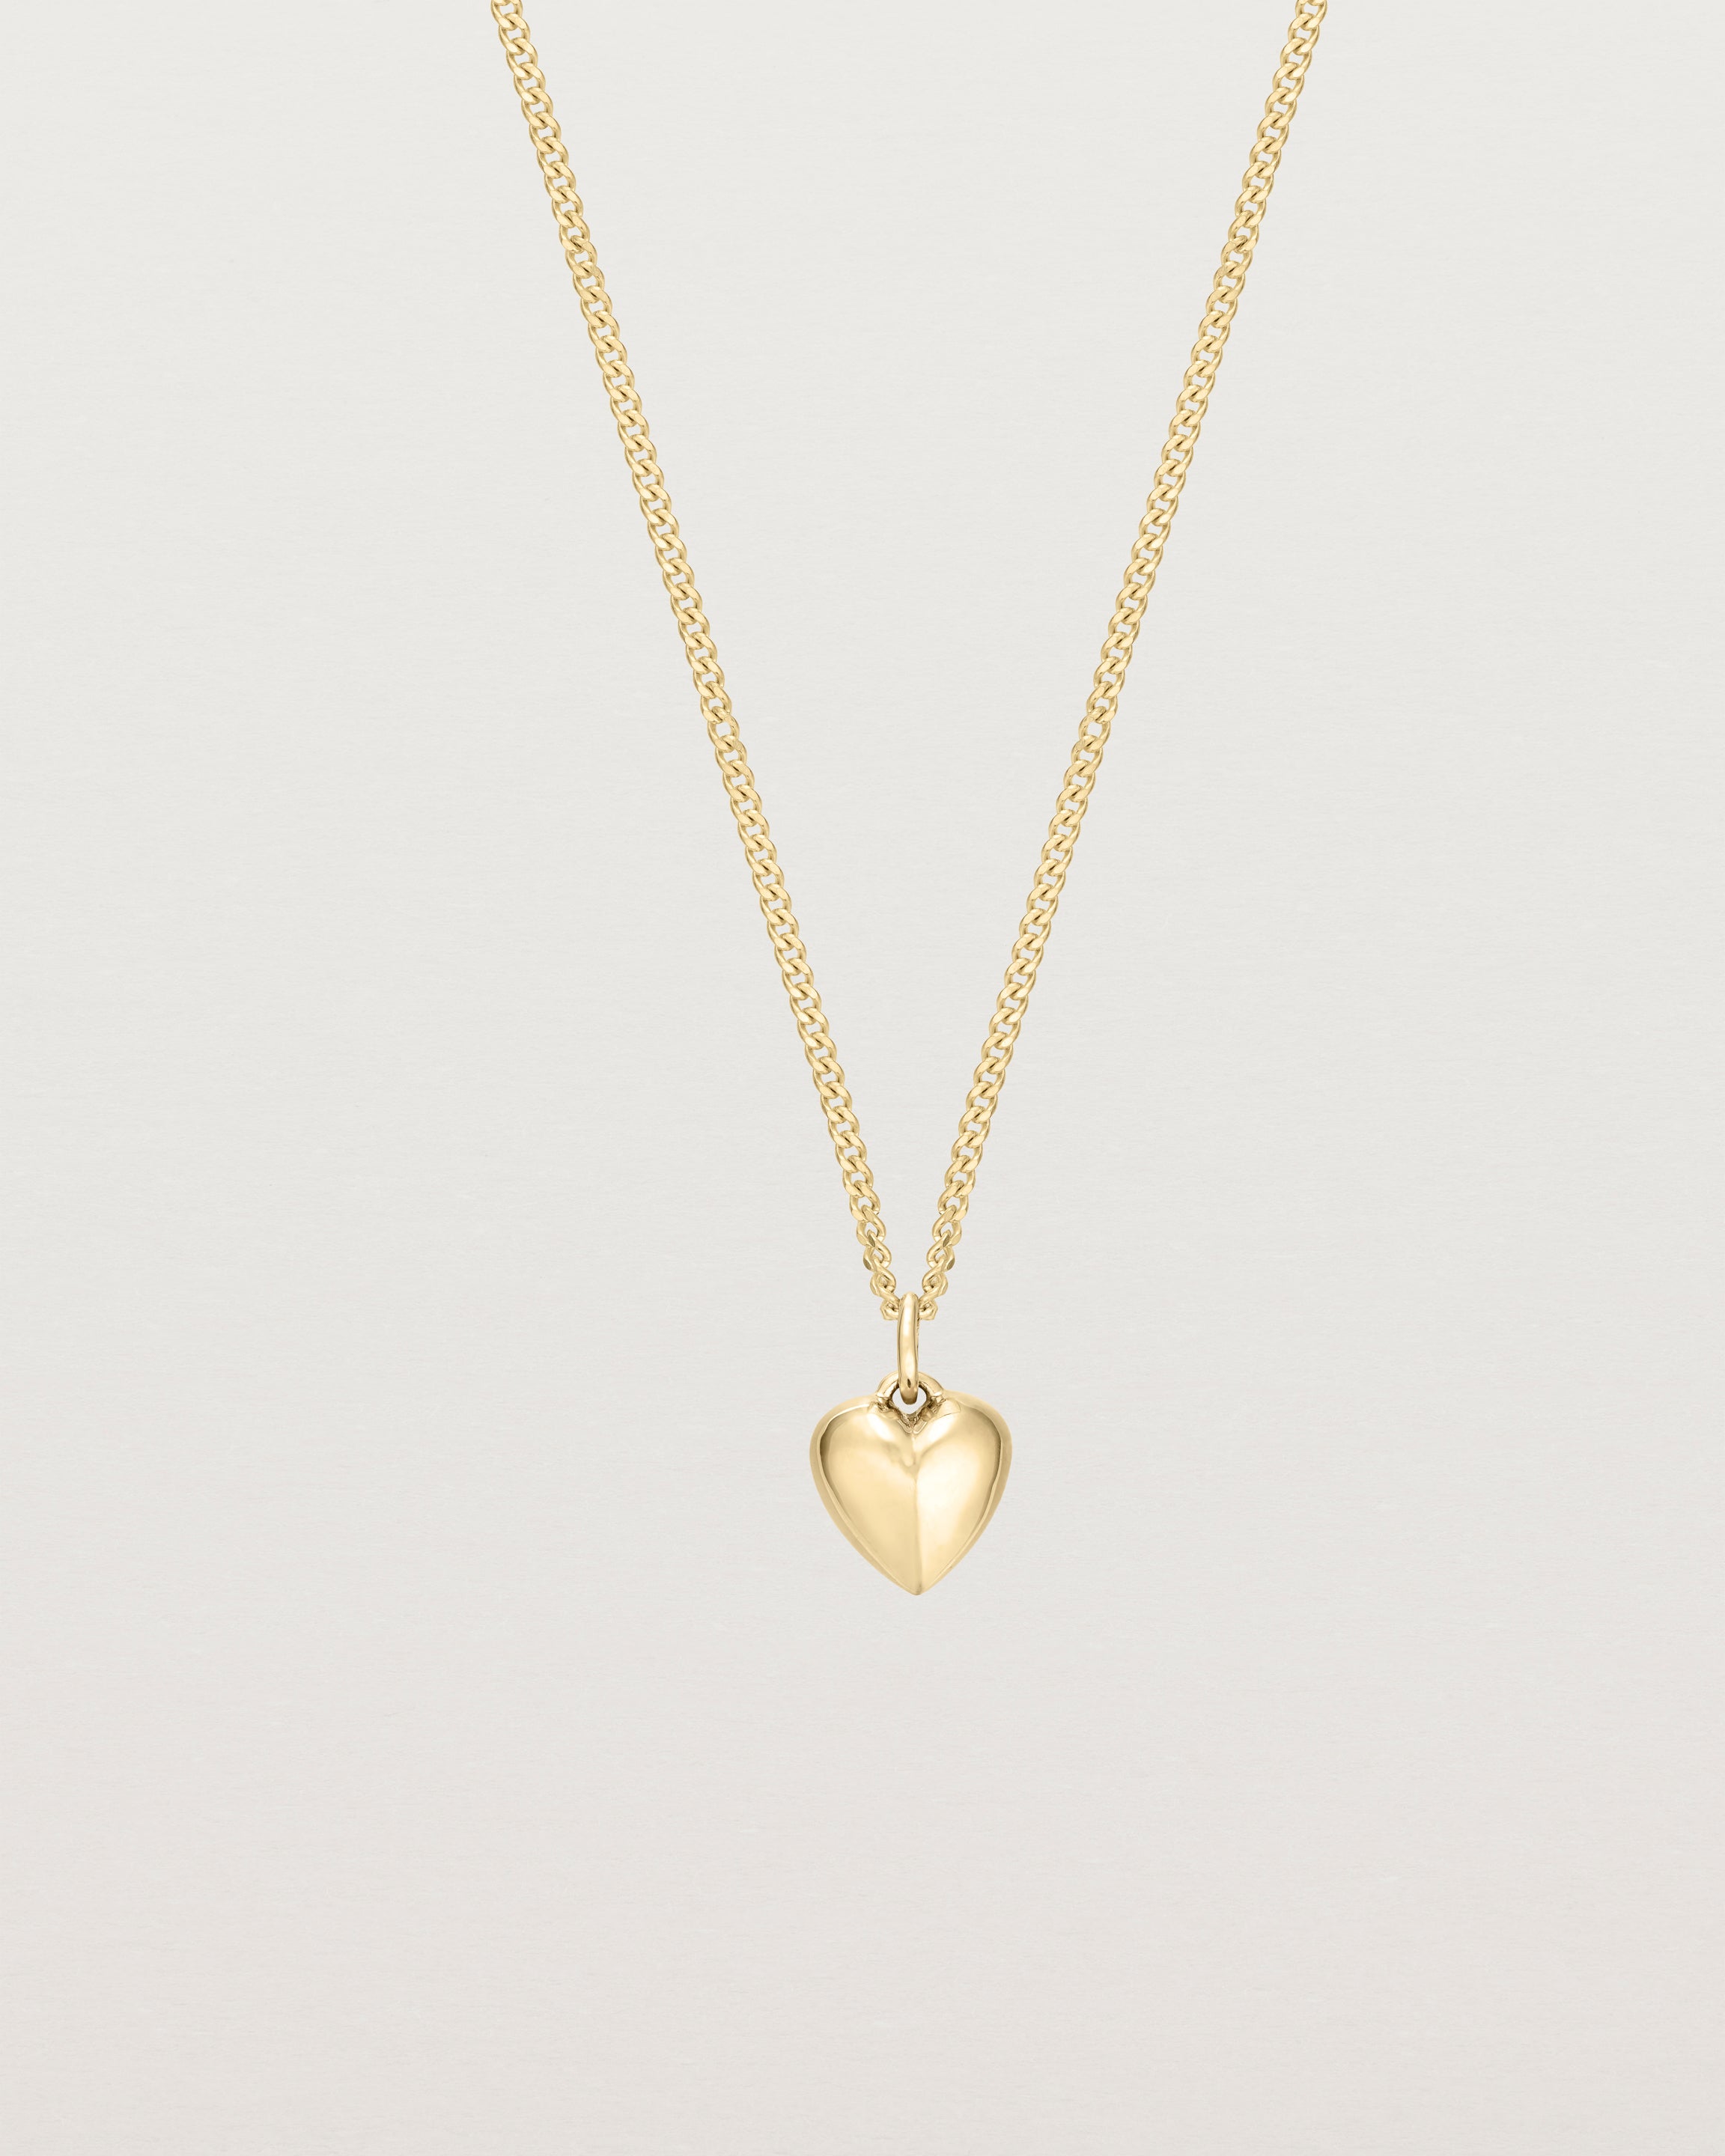 Front on image of gold heart necklace.